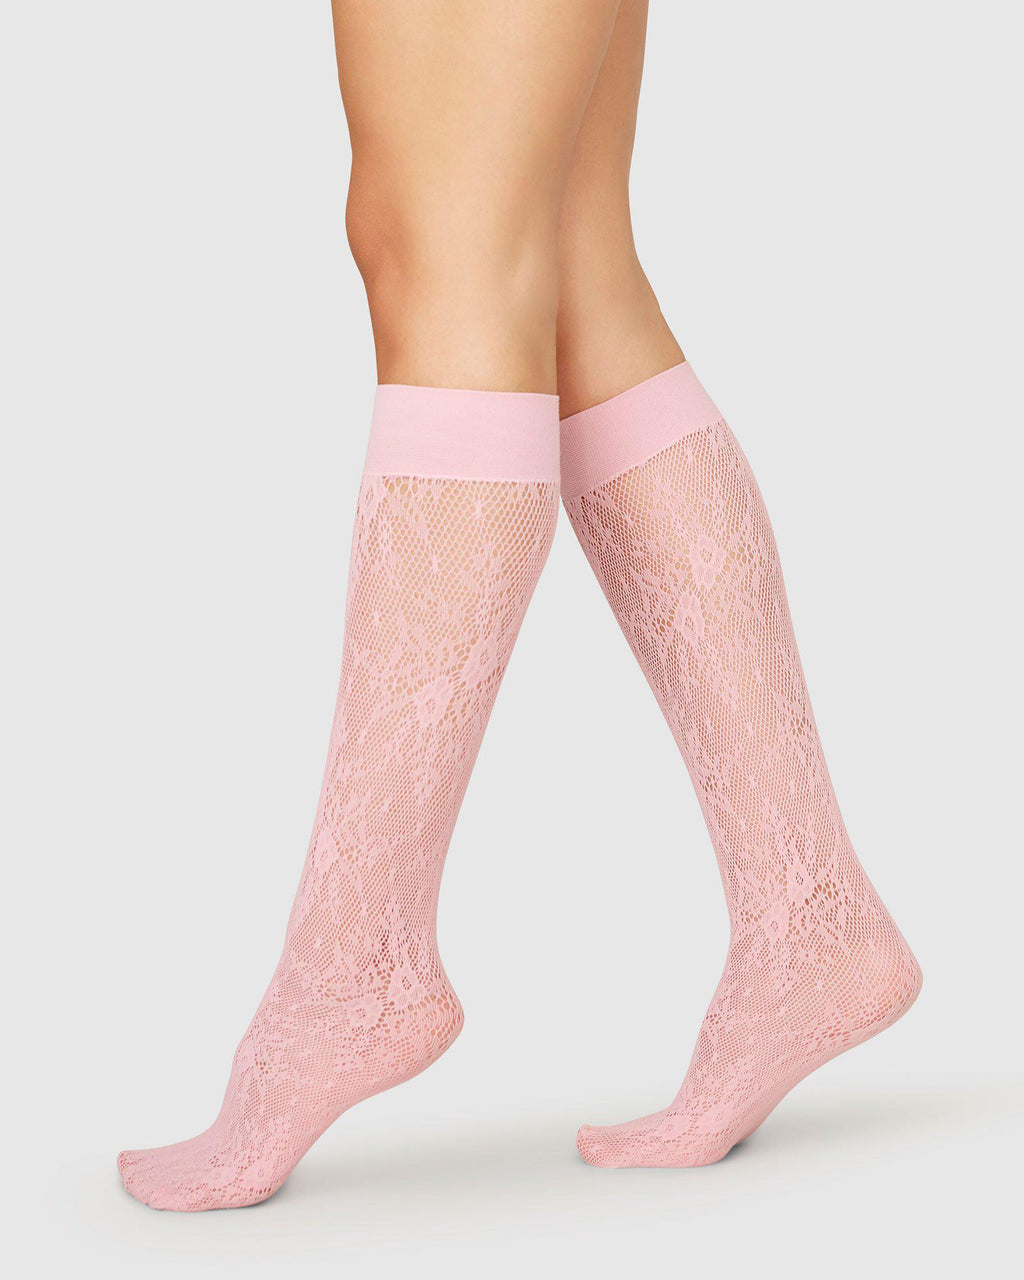 Pink light Braided stockings with padding - Buy Online